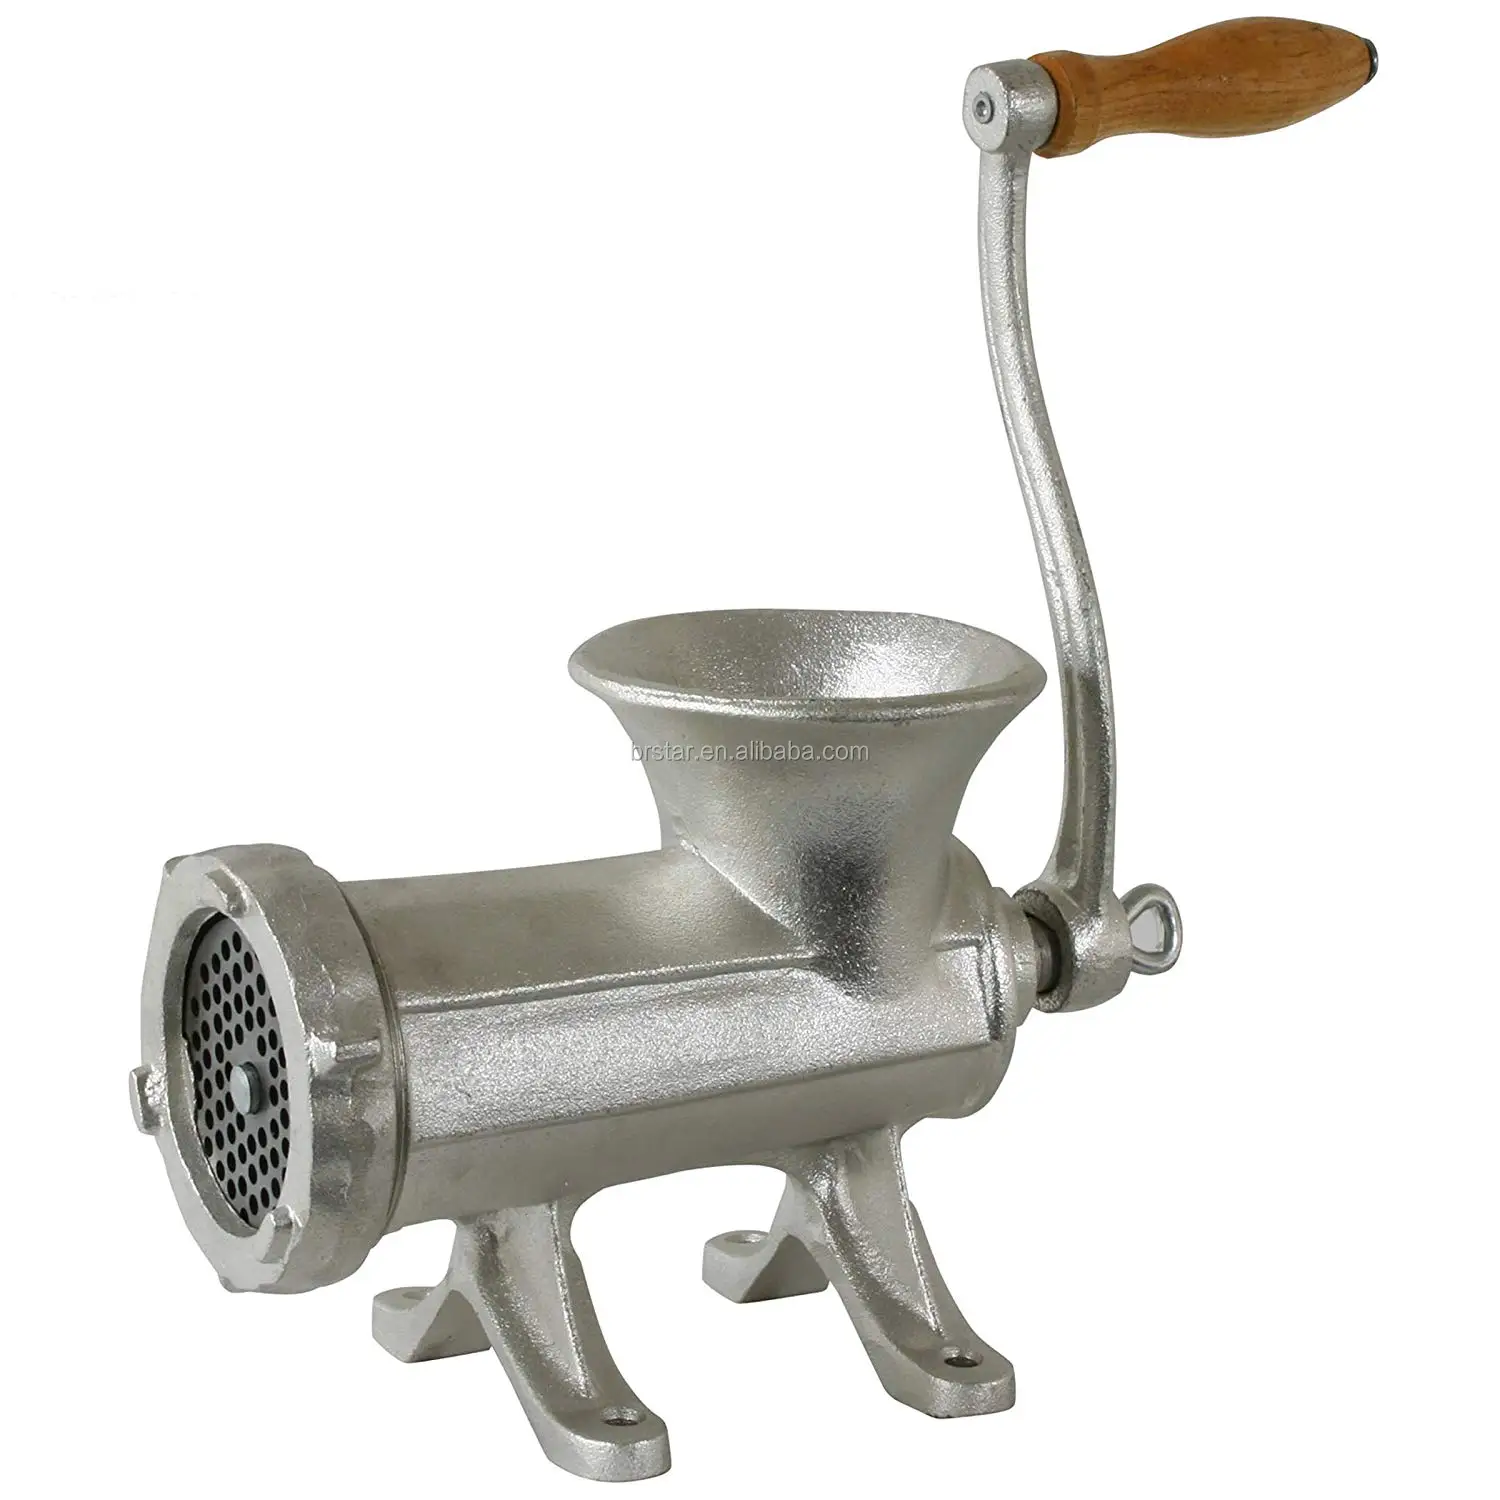 No.32 Meat Grinder With Pulley - Buy Hand Held Meat Grinder,Manual Meat